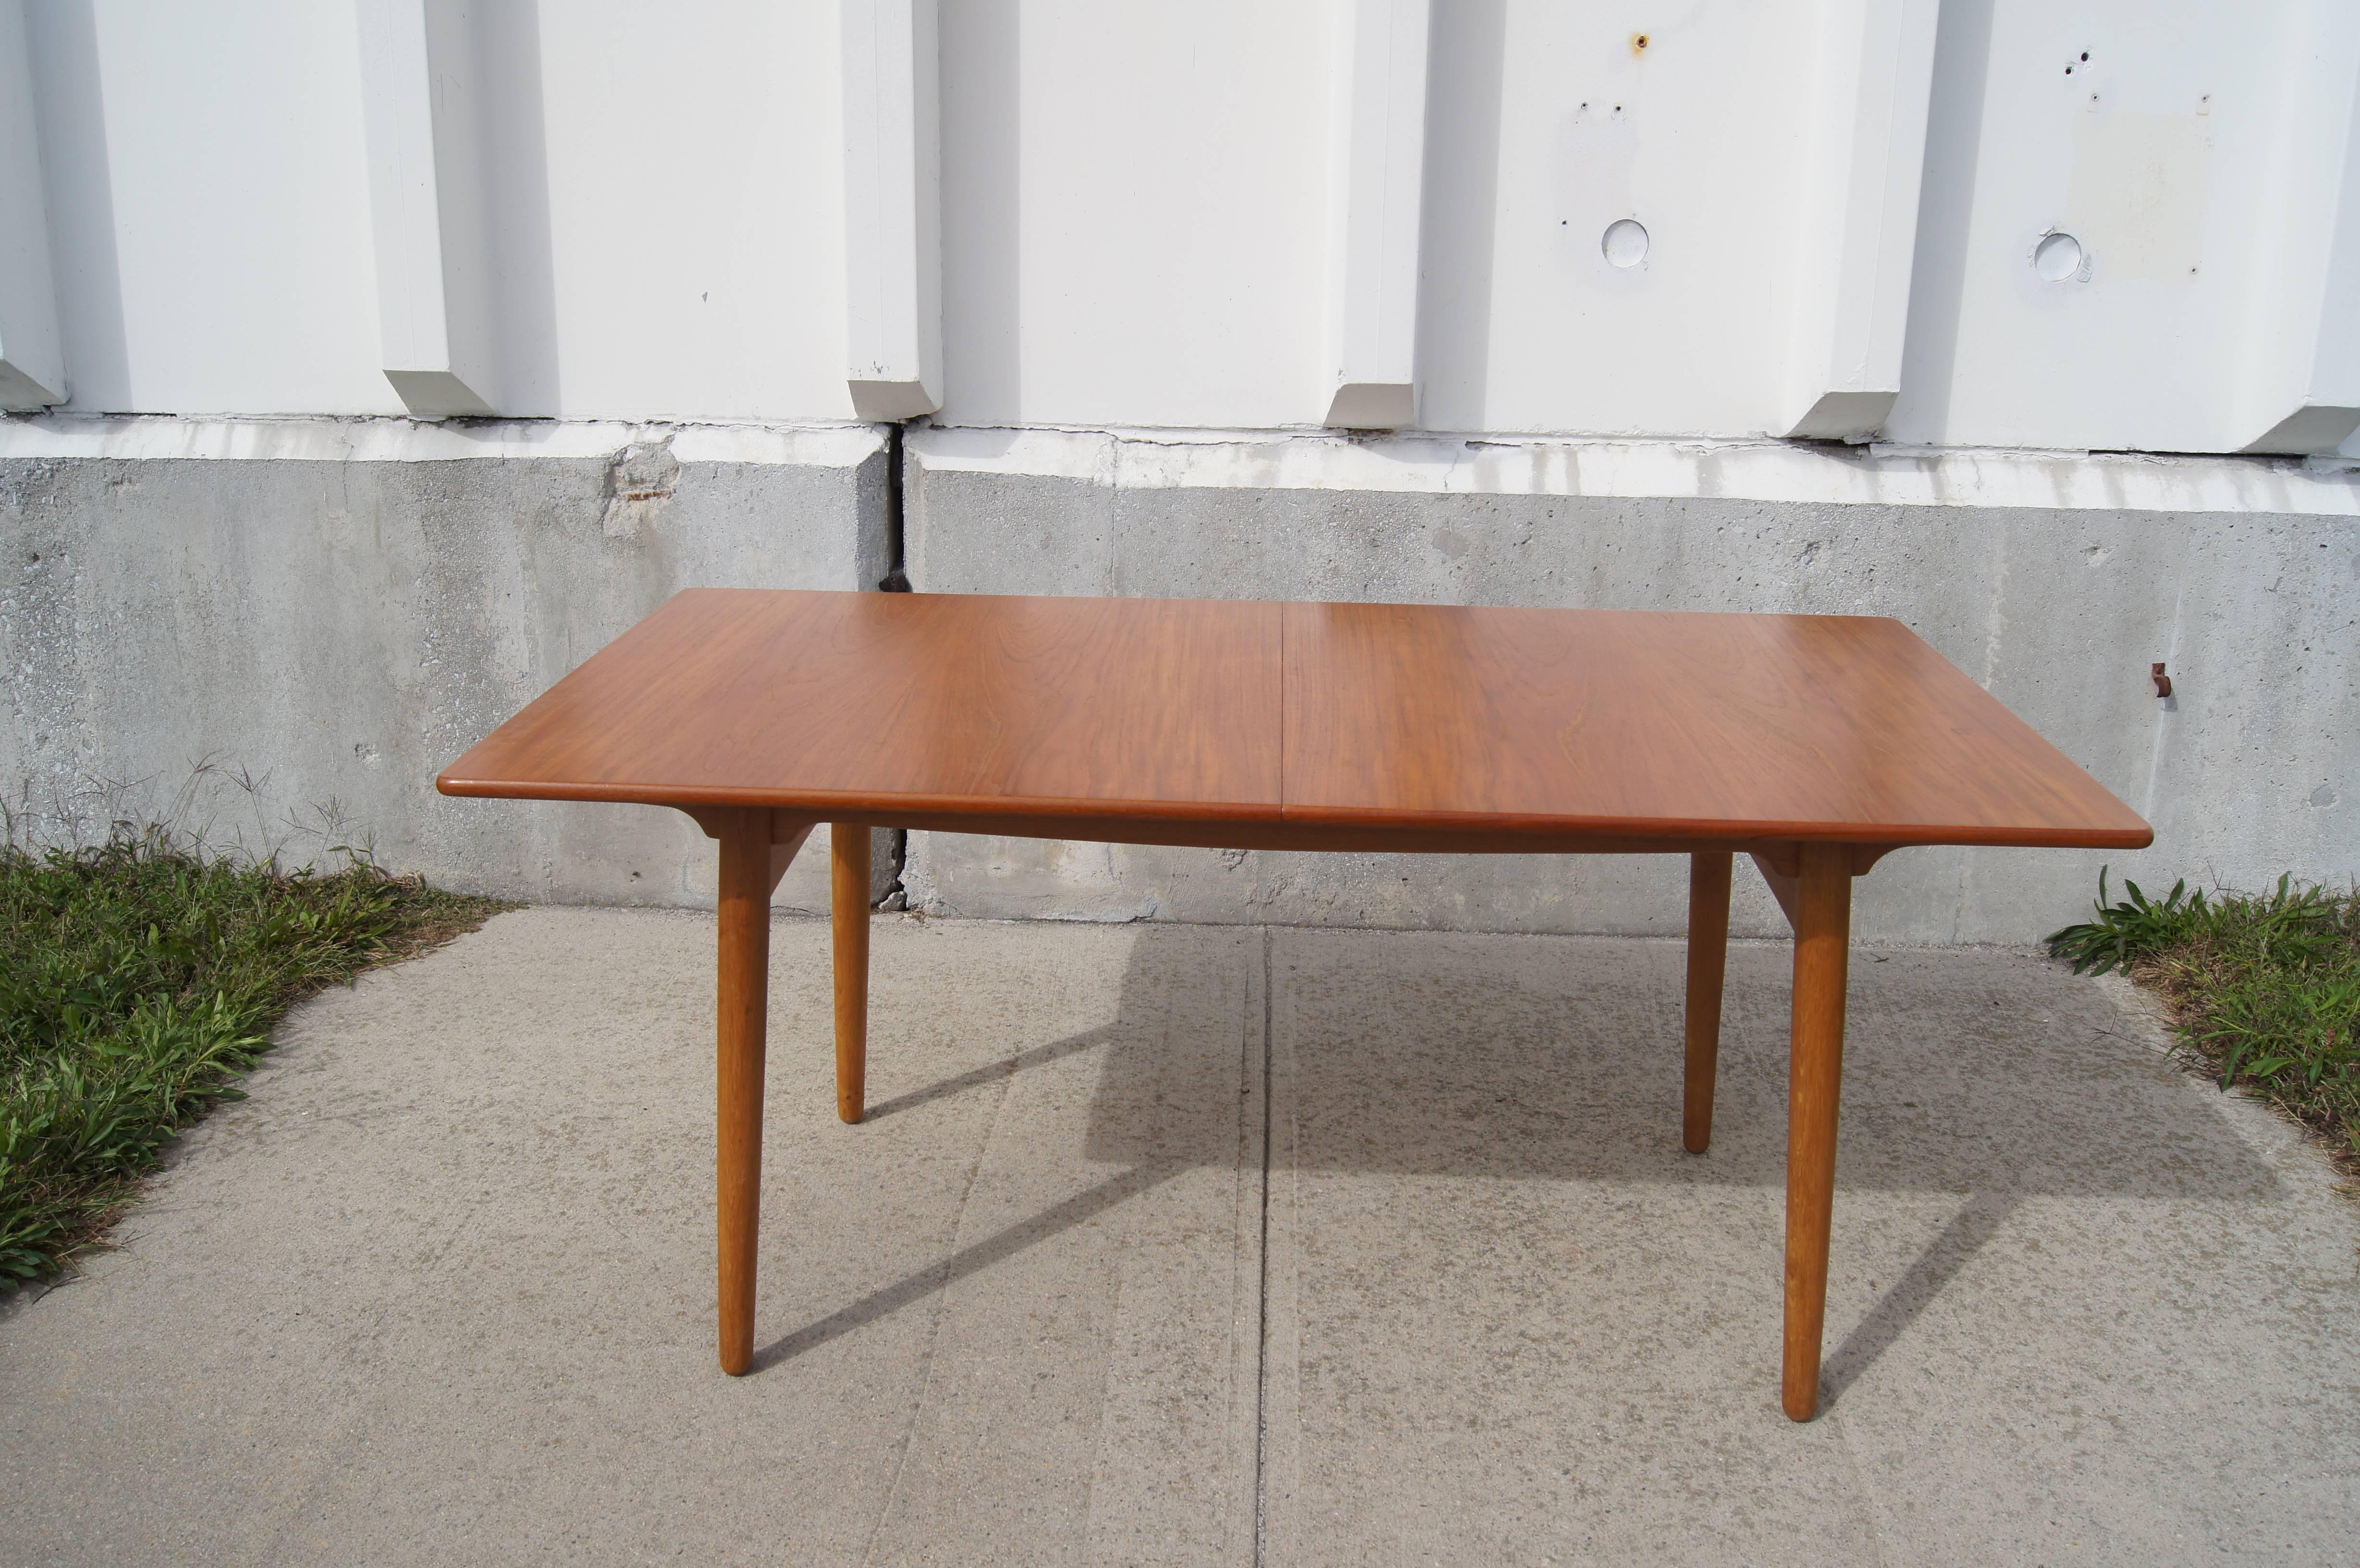 Hans Wegner designed this dining table, model AT310, for Danish manufacturer Andreas Tuck. It comprises a teak top with oak legs and base. The table includes two 15.75